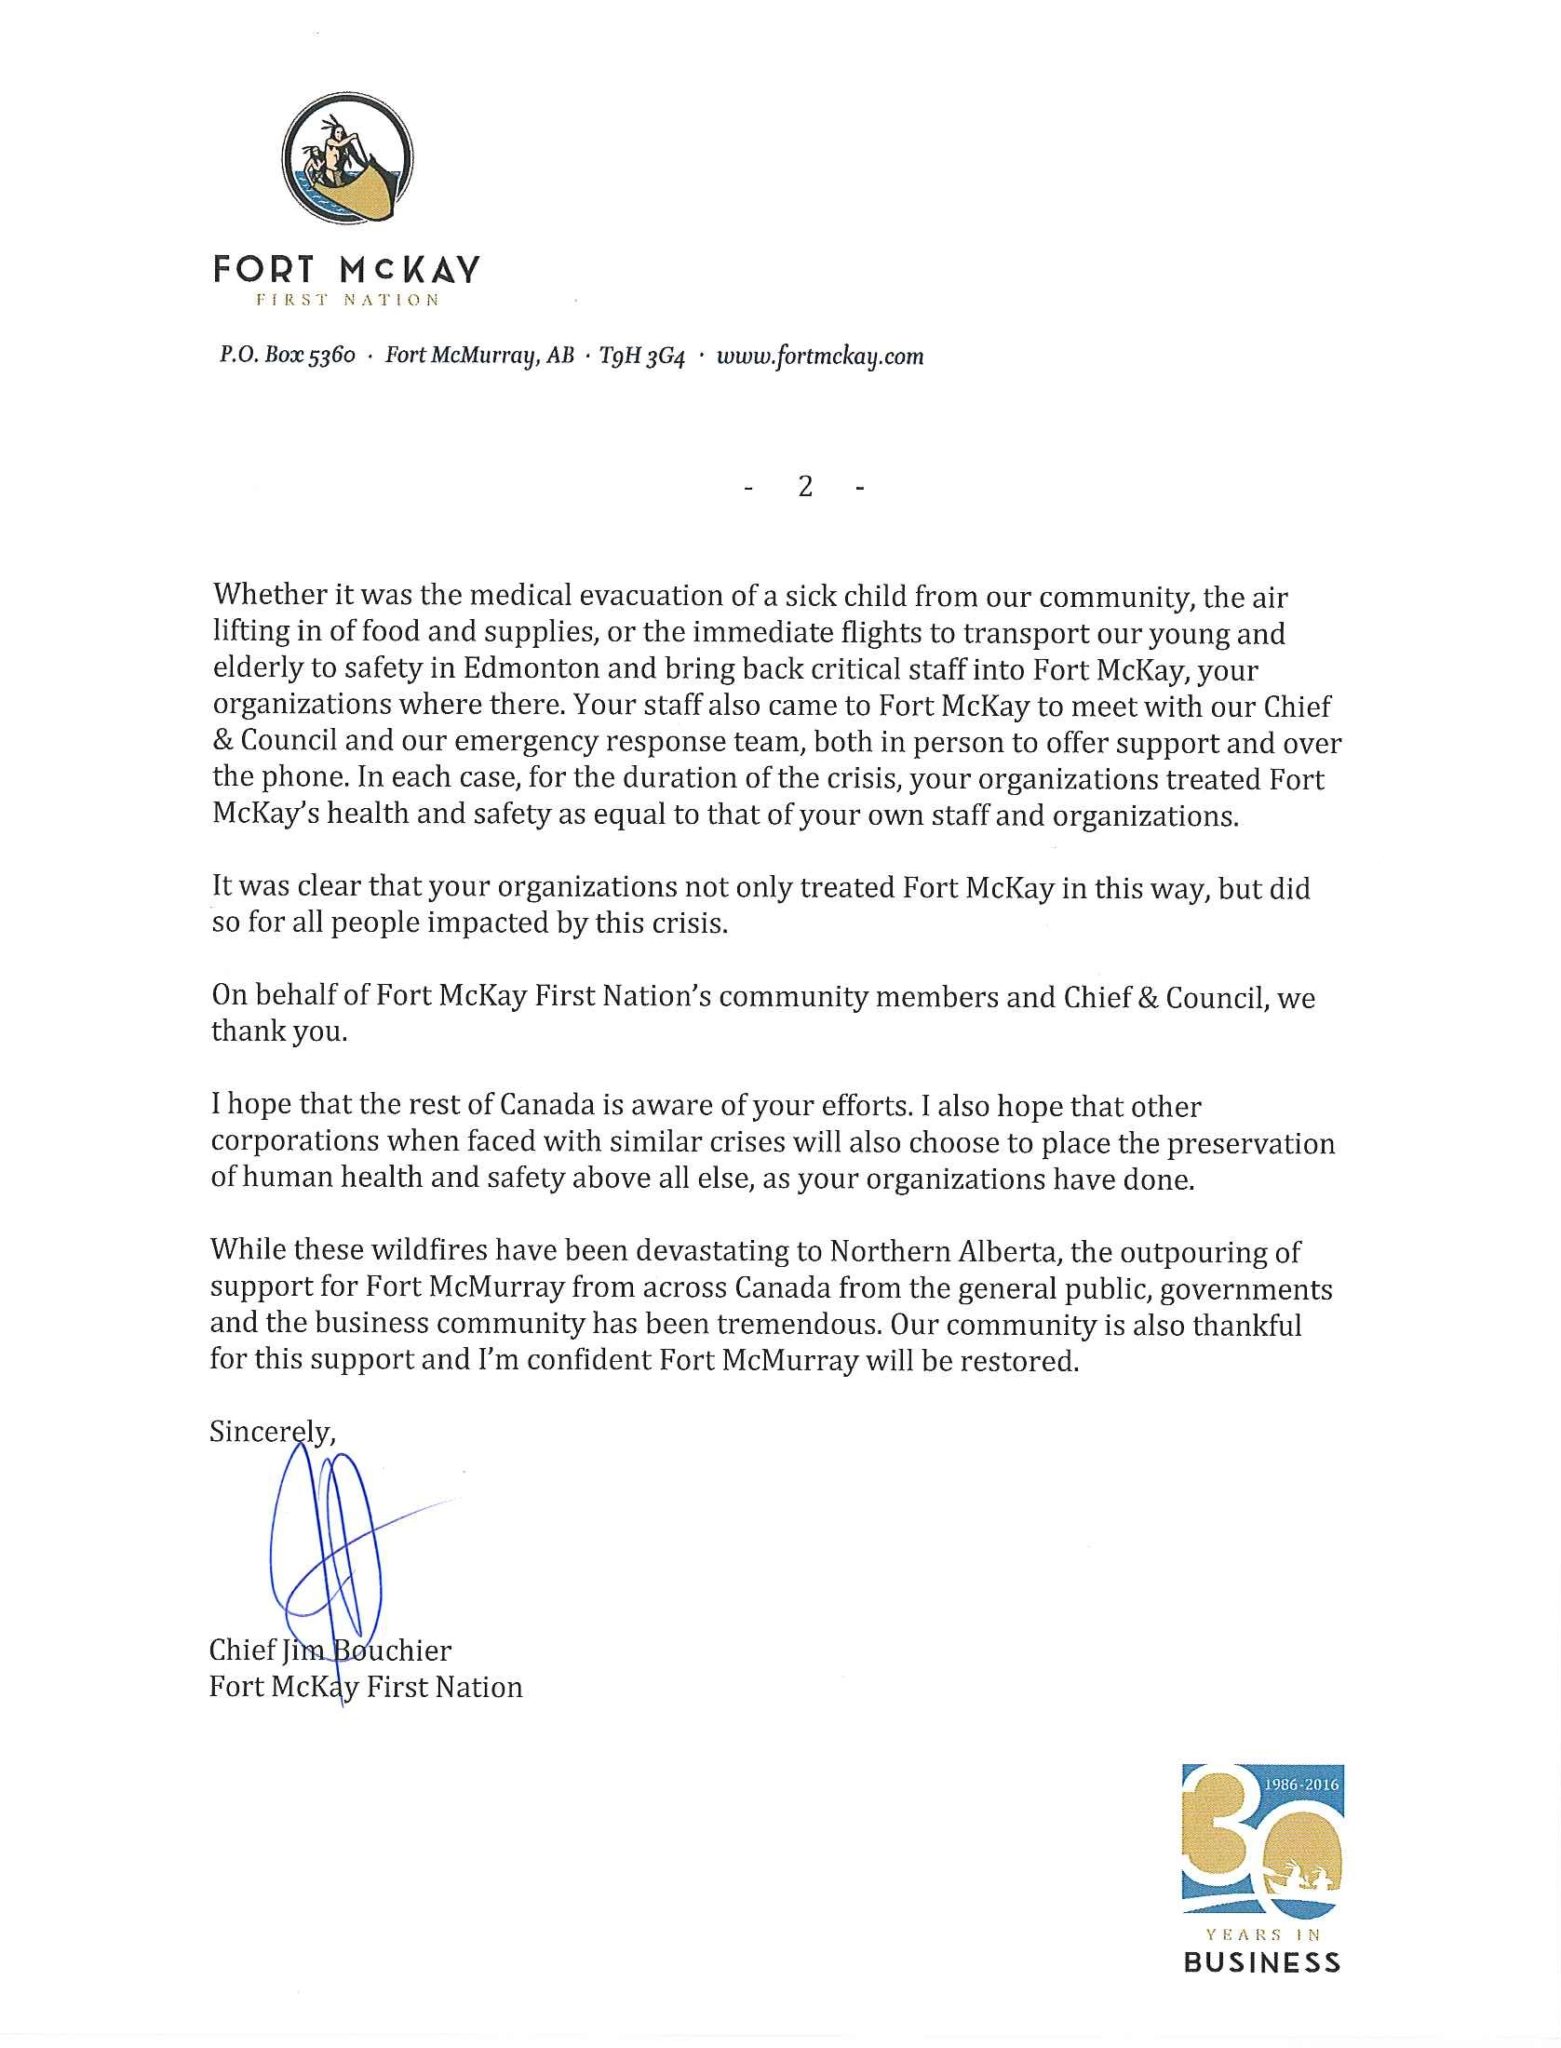 Chief Bouchier - Fort McMurray Fire - Open Letter to CNRL, Shell, Syncrude, Suncor (b)